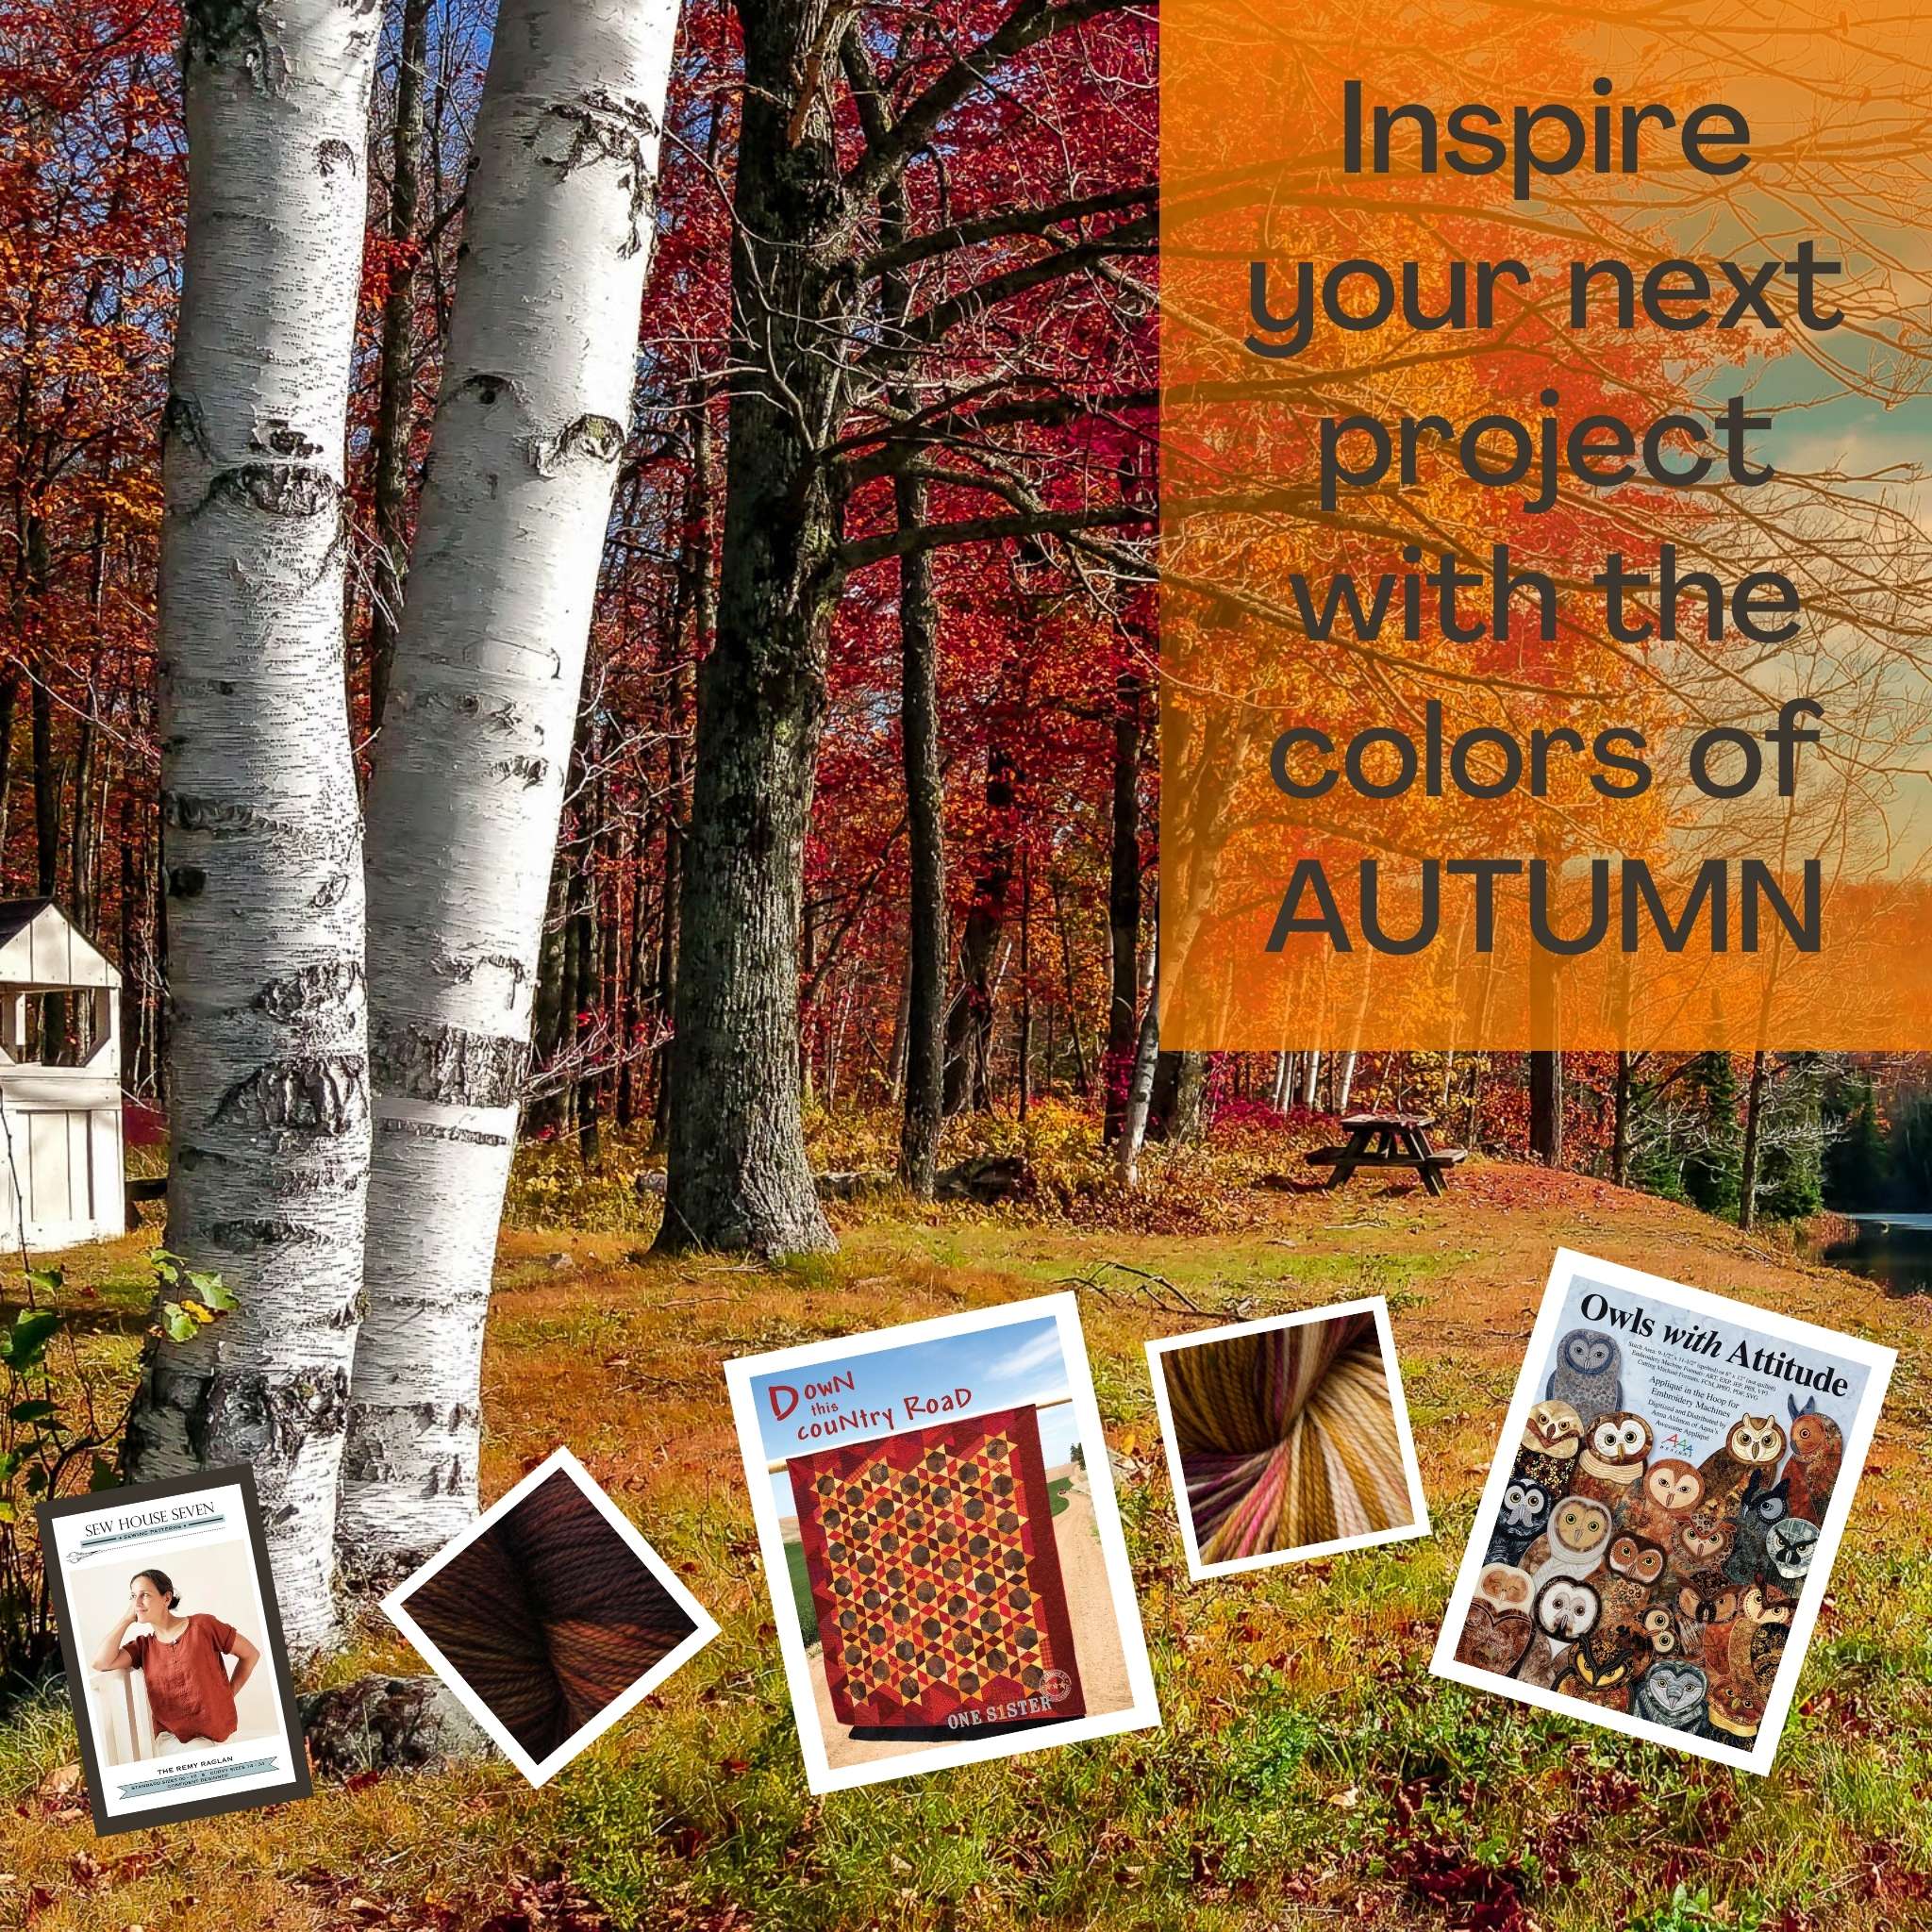 Birch trees and autumn colors at a rural country park inspire your next project